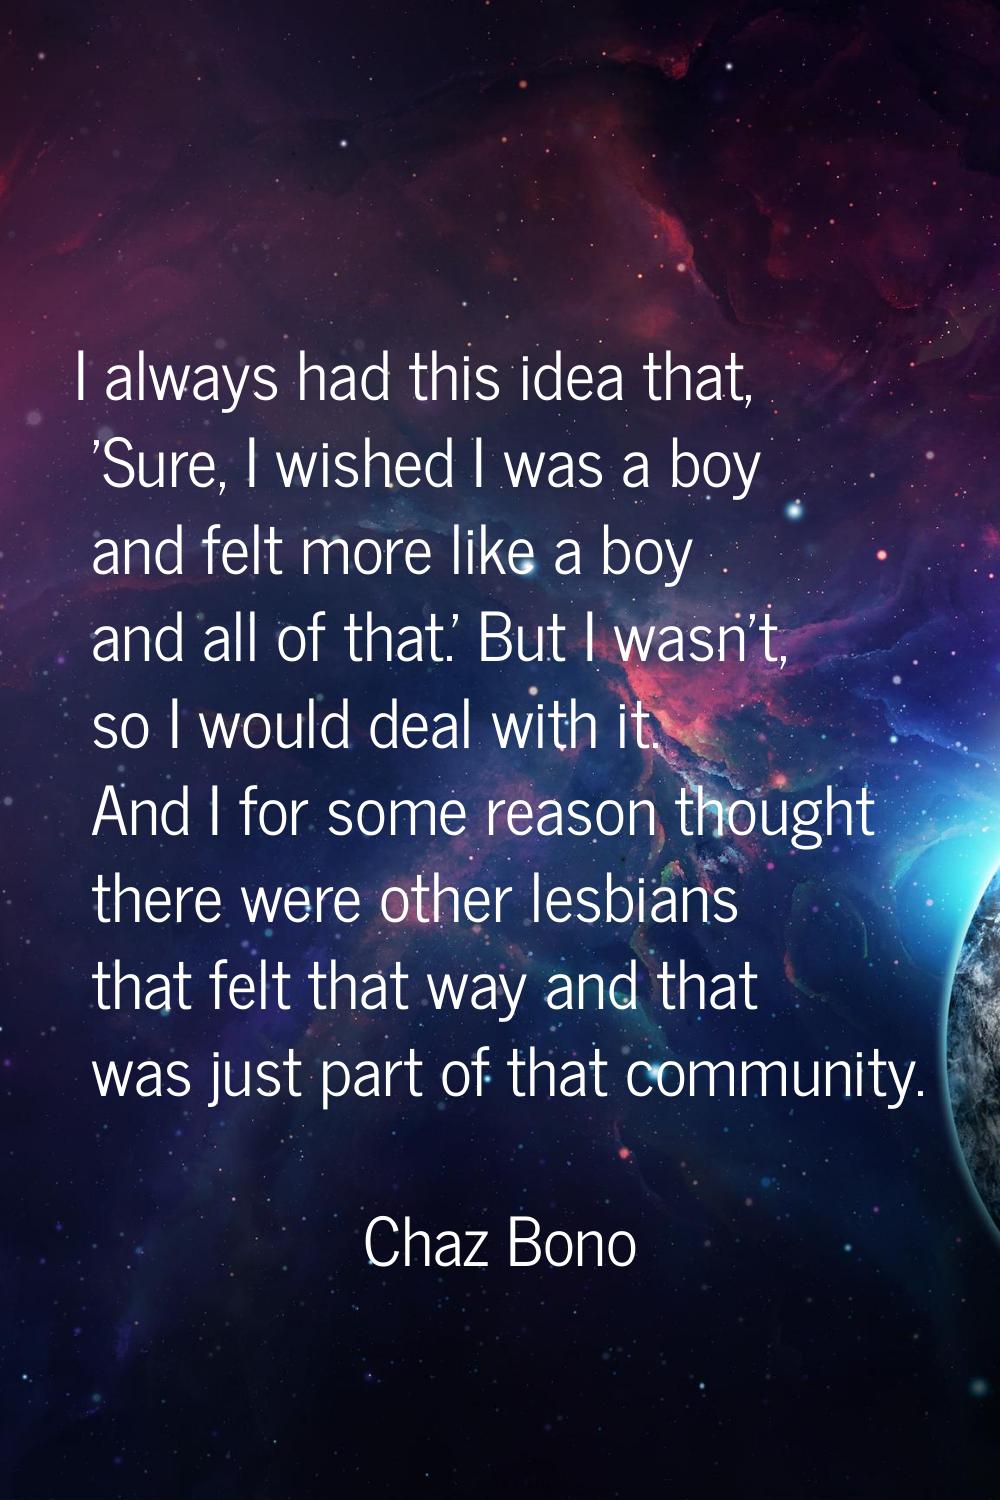 I always had this idea that, 'Sure, I wished I was a boy and felt more like a boy and all of that.'